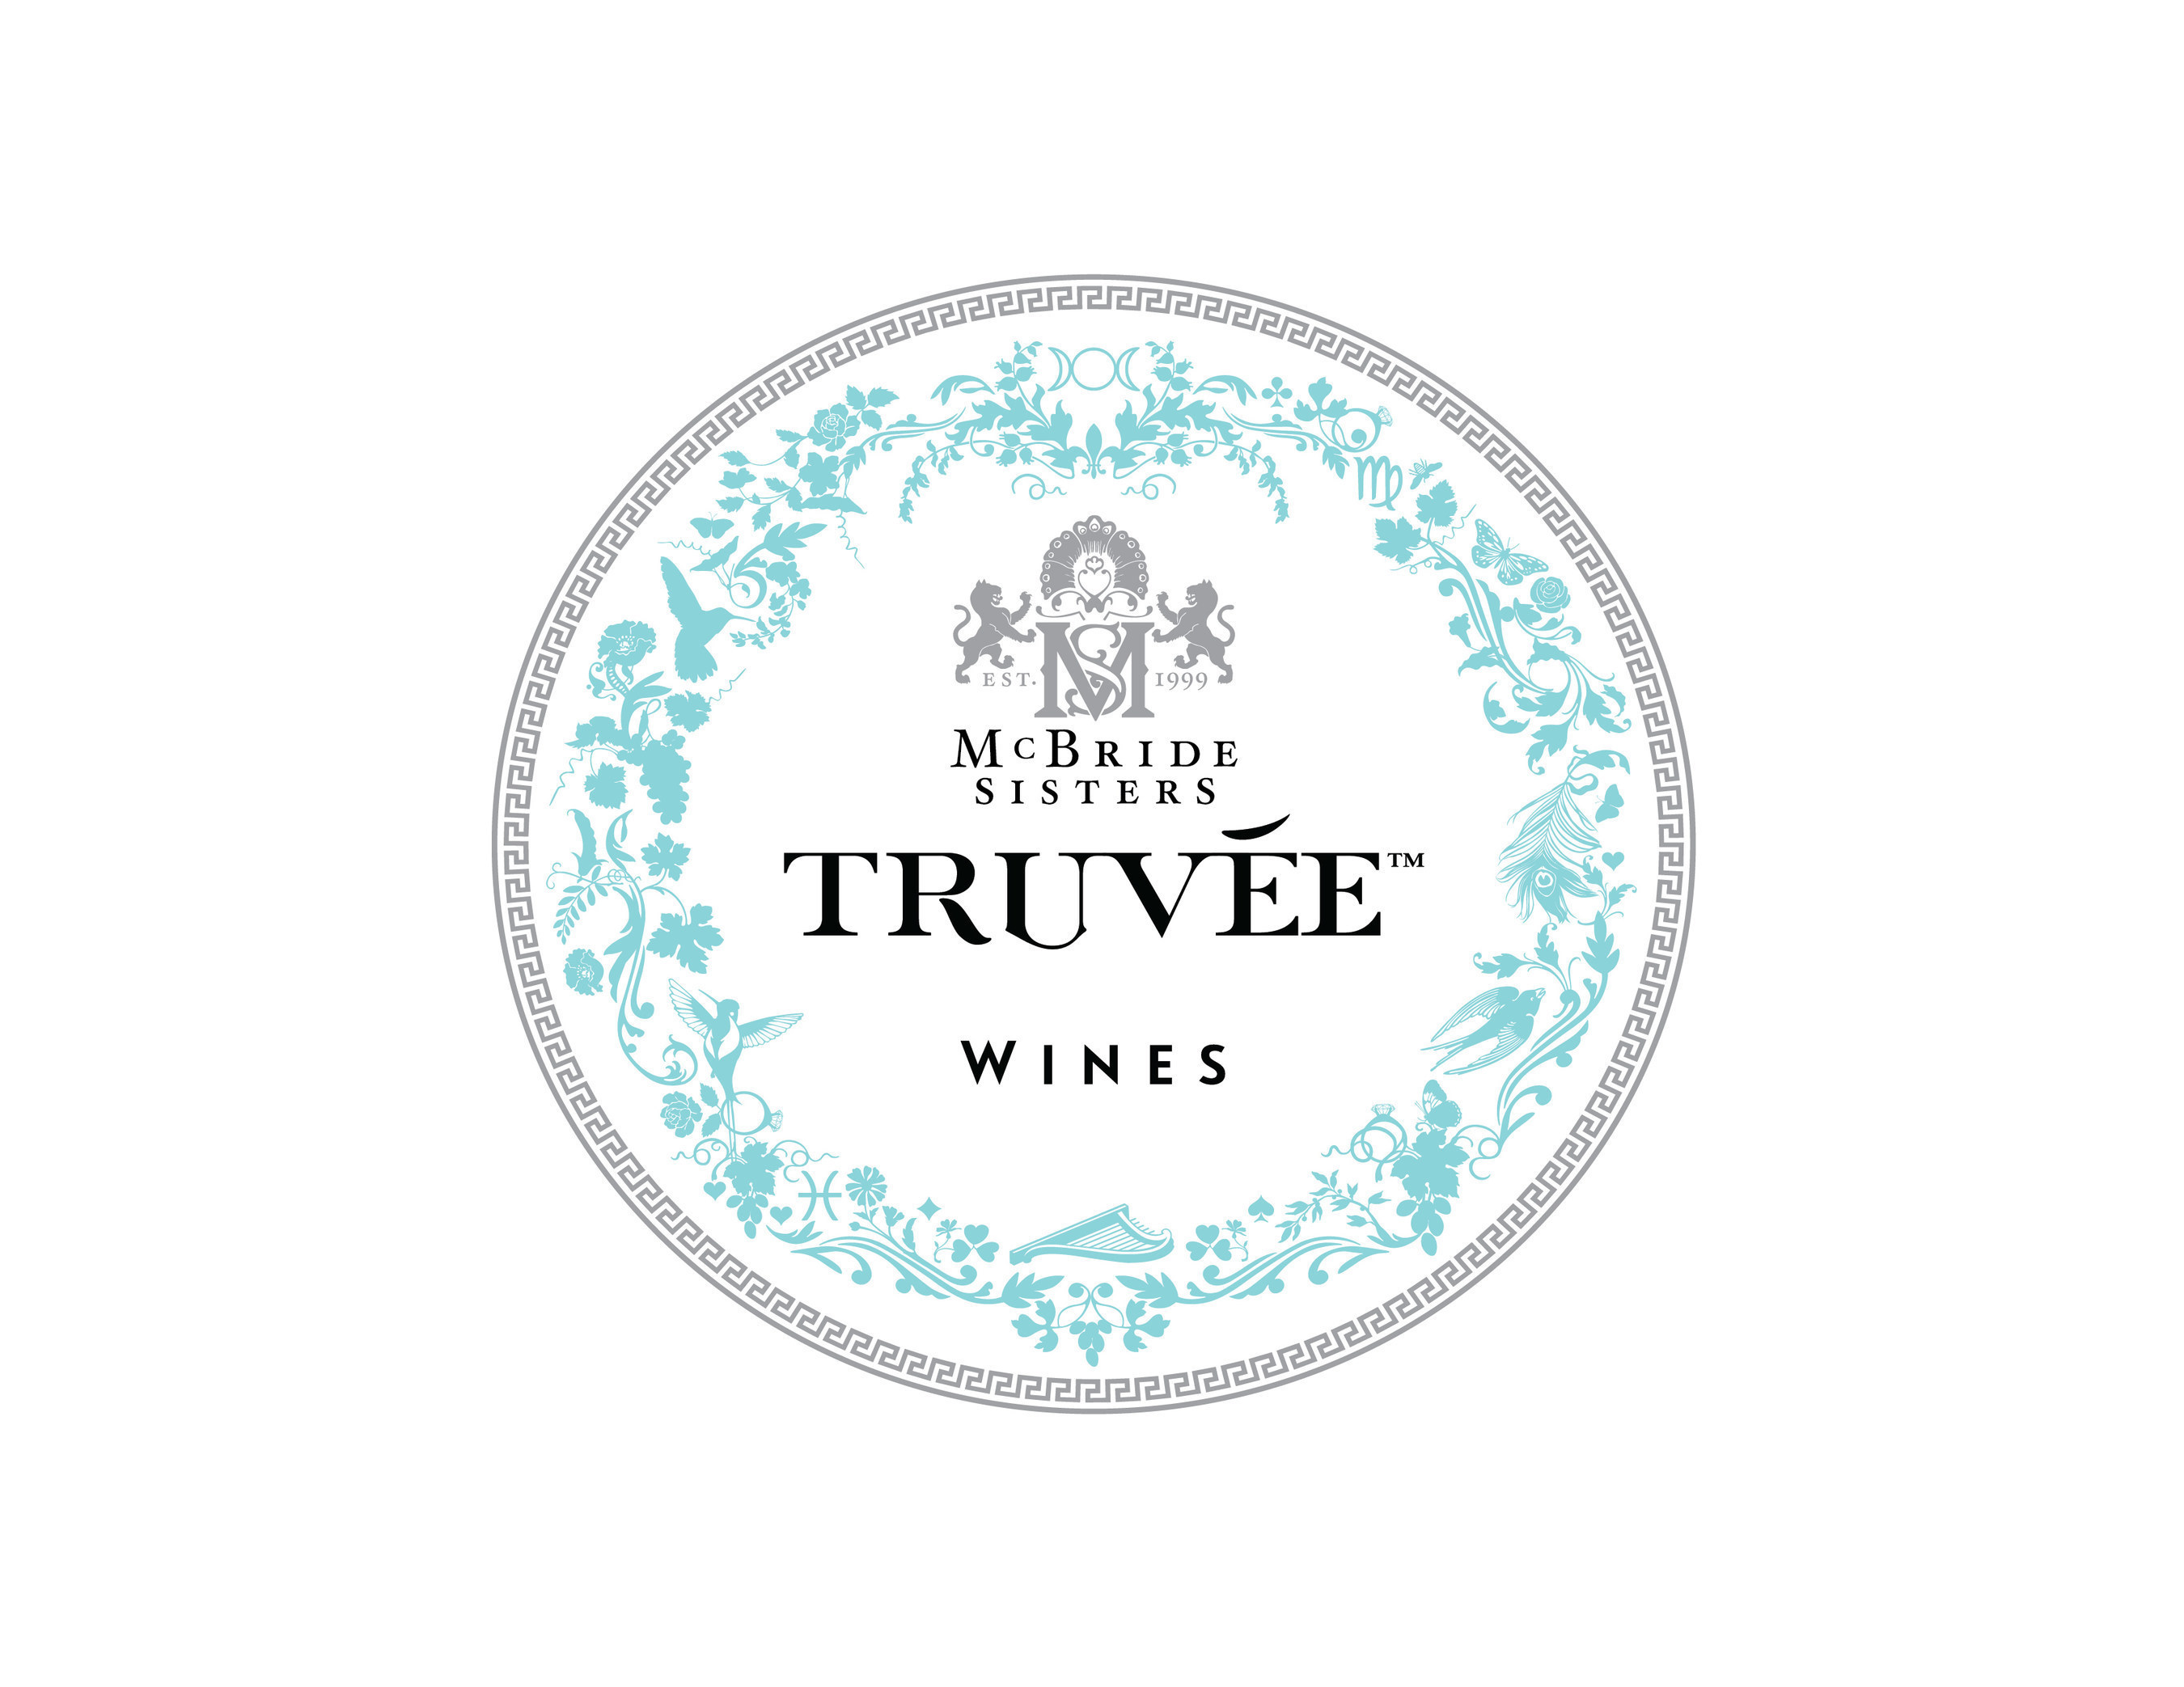 The latest wine release from Diageo Chateau & Estate Wines, Truvee, co-created by sisters' Robin and Andrea McBride. The two Central Coast grown varietals, are a lightly oaked Chardonnay and a Rhone Style Red Blend.